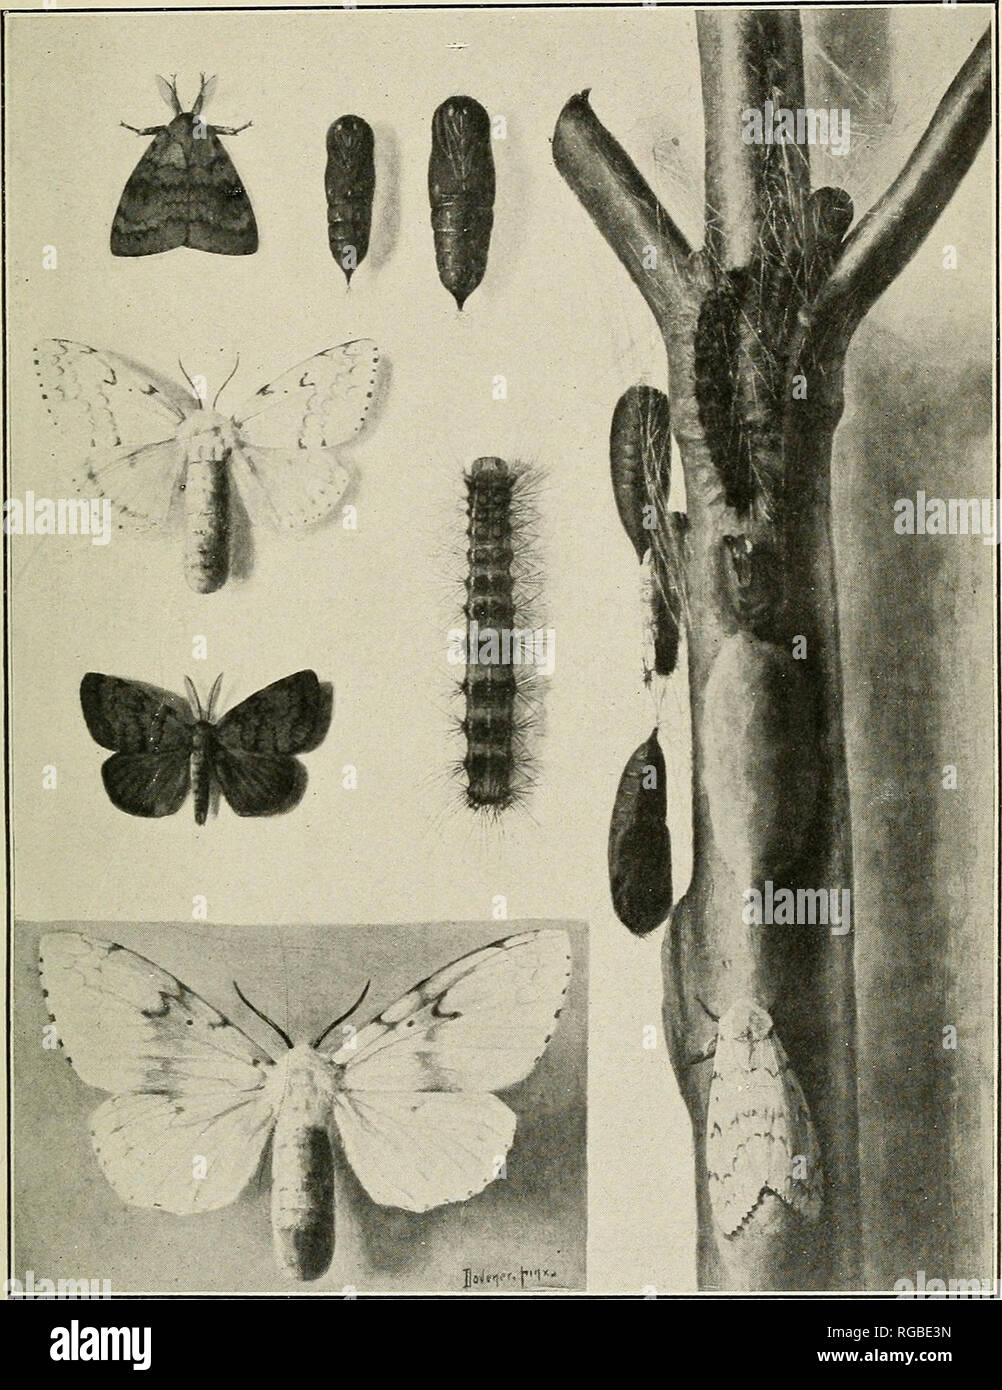 . Bulletin of the U.S. Department of Agriculture. Agriculture; Agriculture. Bui. 204, U. S. Dept. of Agriculture. Plate I.. The Gipsy Moth (Porthetria dispar). Upper left, male moth with wings folded ; just below this, female moth with wings spread ; just below this, male moth with wings spread; lower left, female moth, enlarged; top center, male pupa at left, female pupa at right; center, larva; on branch, at top, newly formed pupa; ou branch; just below this, larva ready to pupate; on branch, left side, pupse; on branch, center, egg cluster, on branch, at bottom, female moth depositing egg c Stock Photo